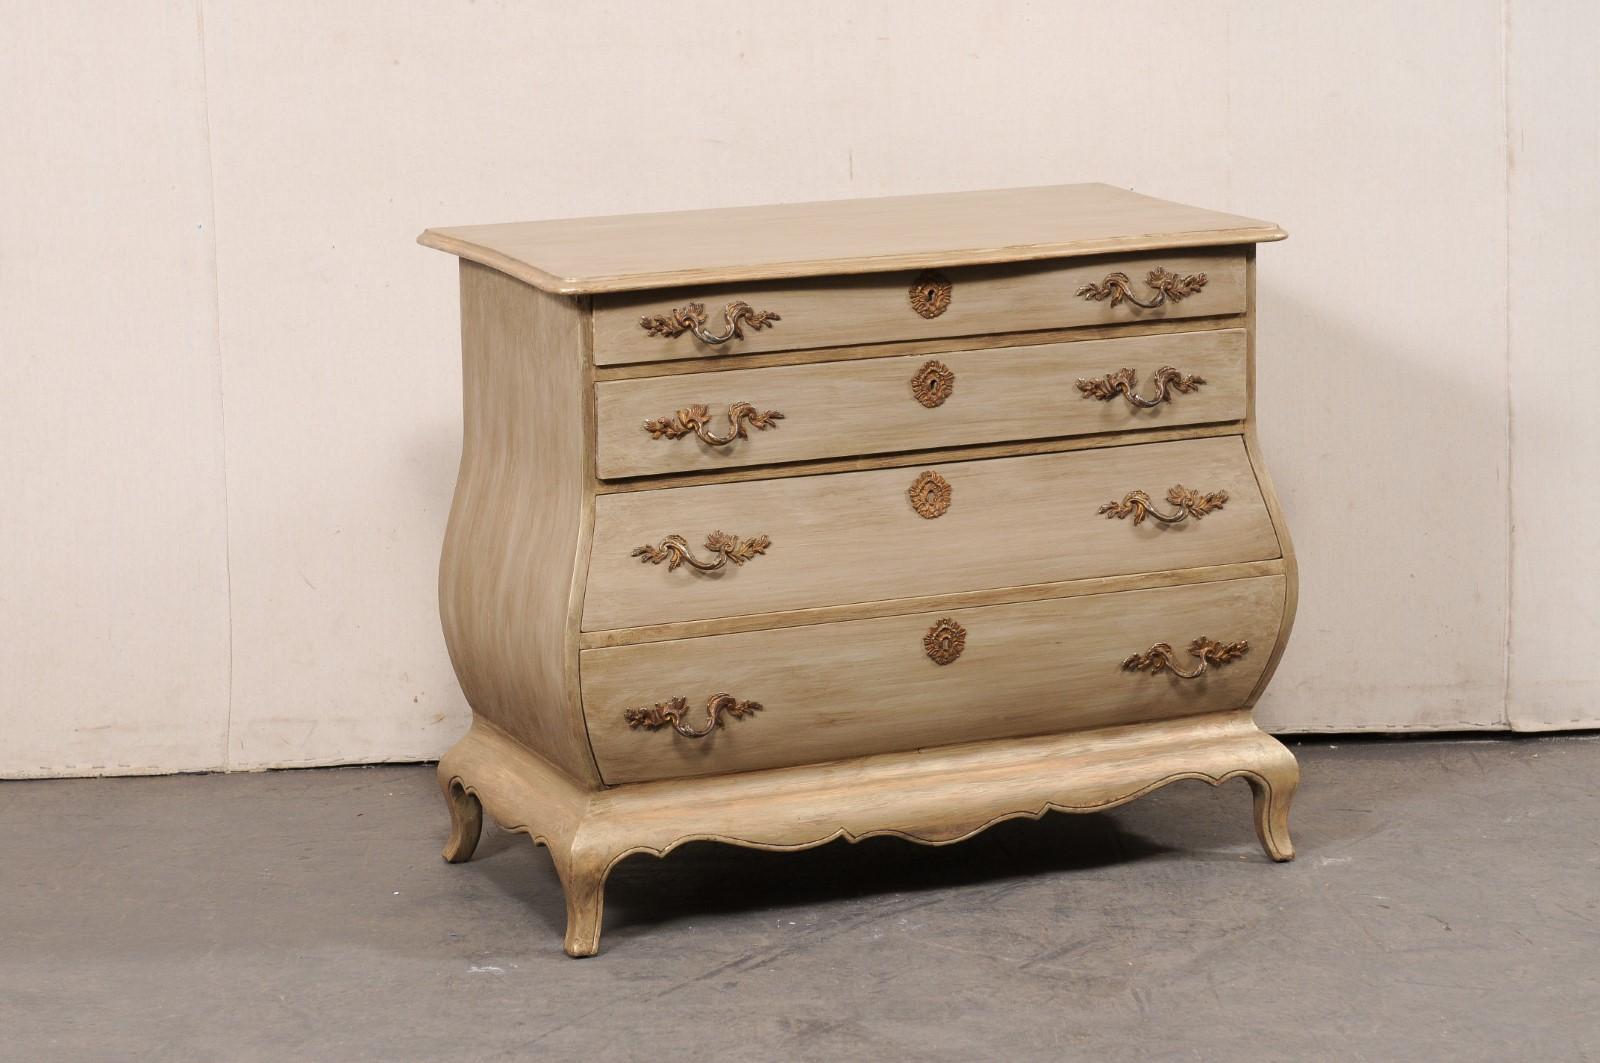 A French bombé style painted wood chest of drawers from the mid 20th century. This vintage commode from France has a rectangular top with subtle serpentine front, atop a shapely body with two upper drawers being housed within a more slender frame